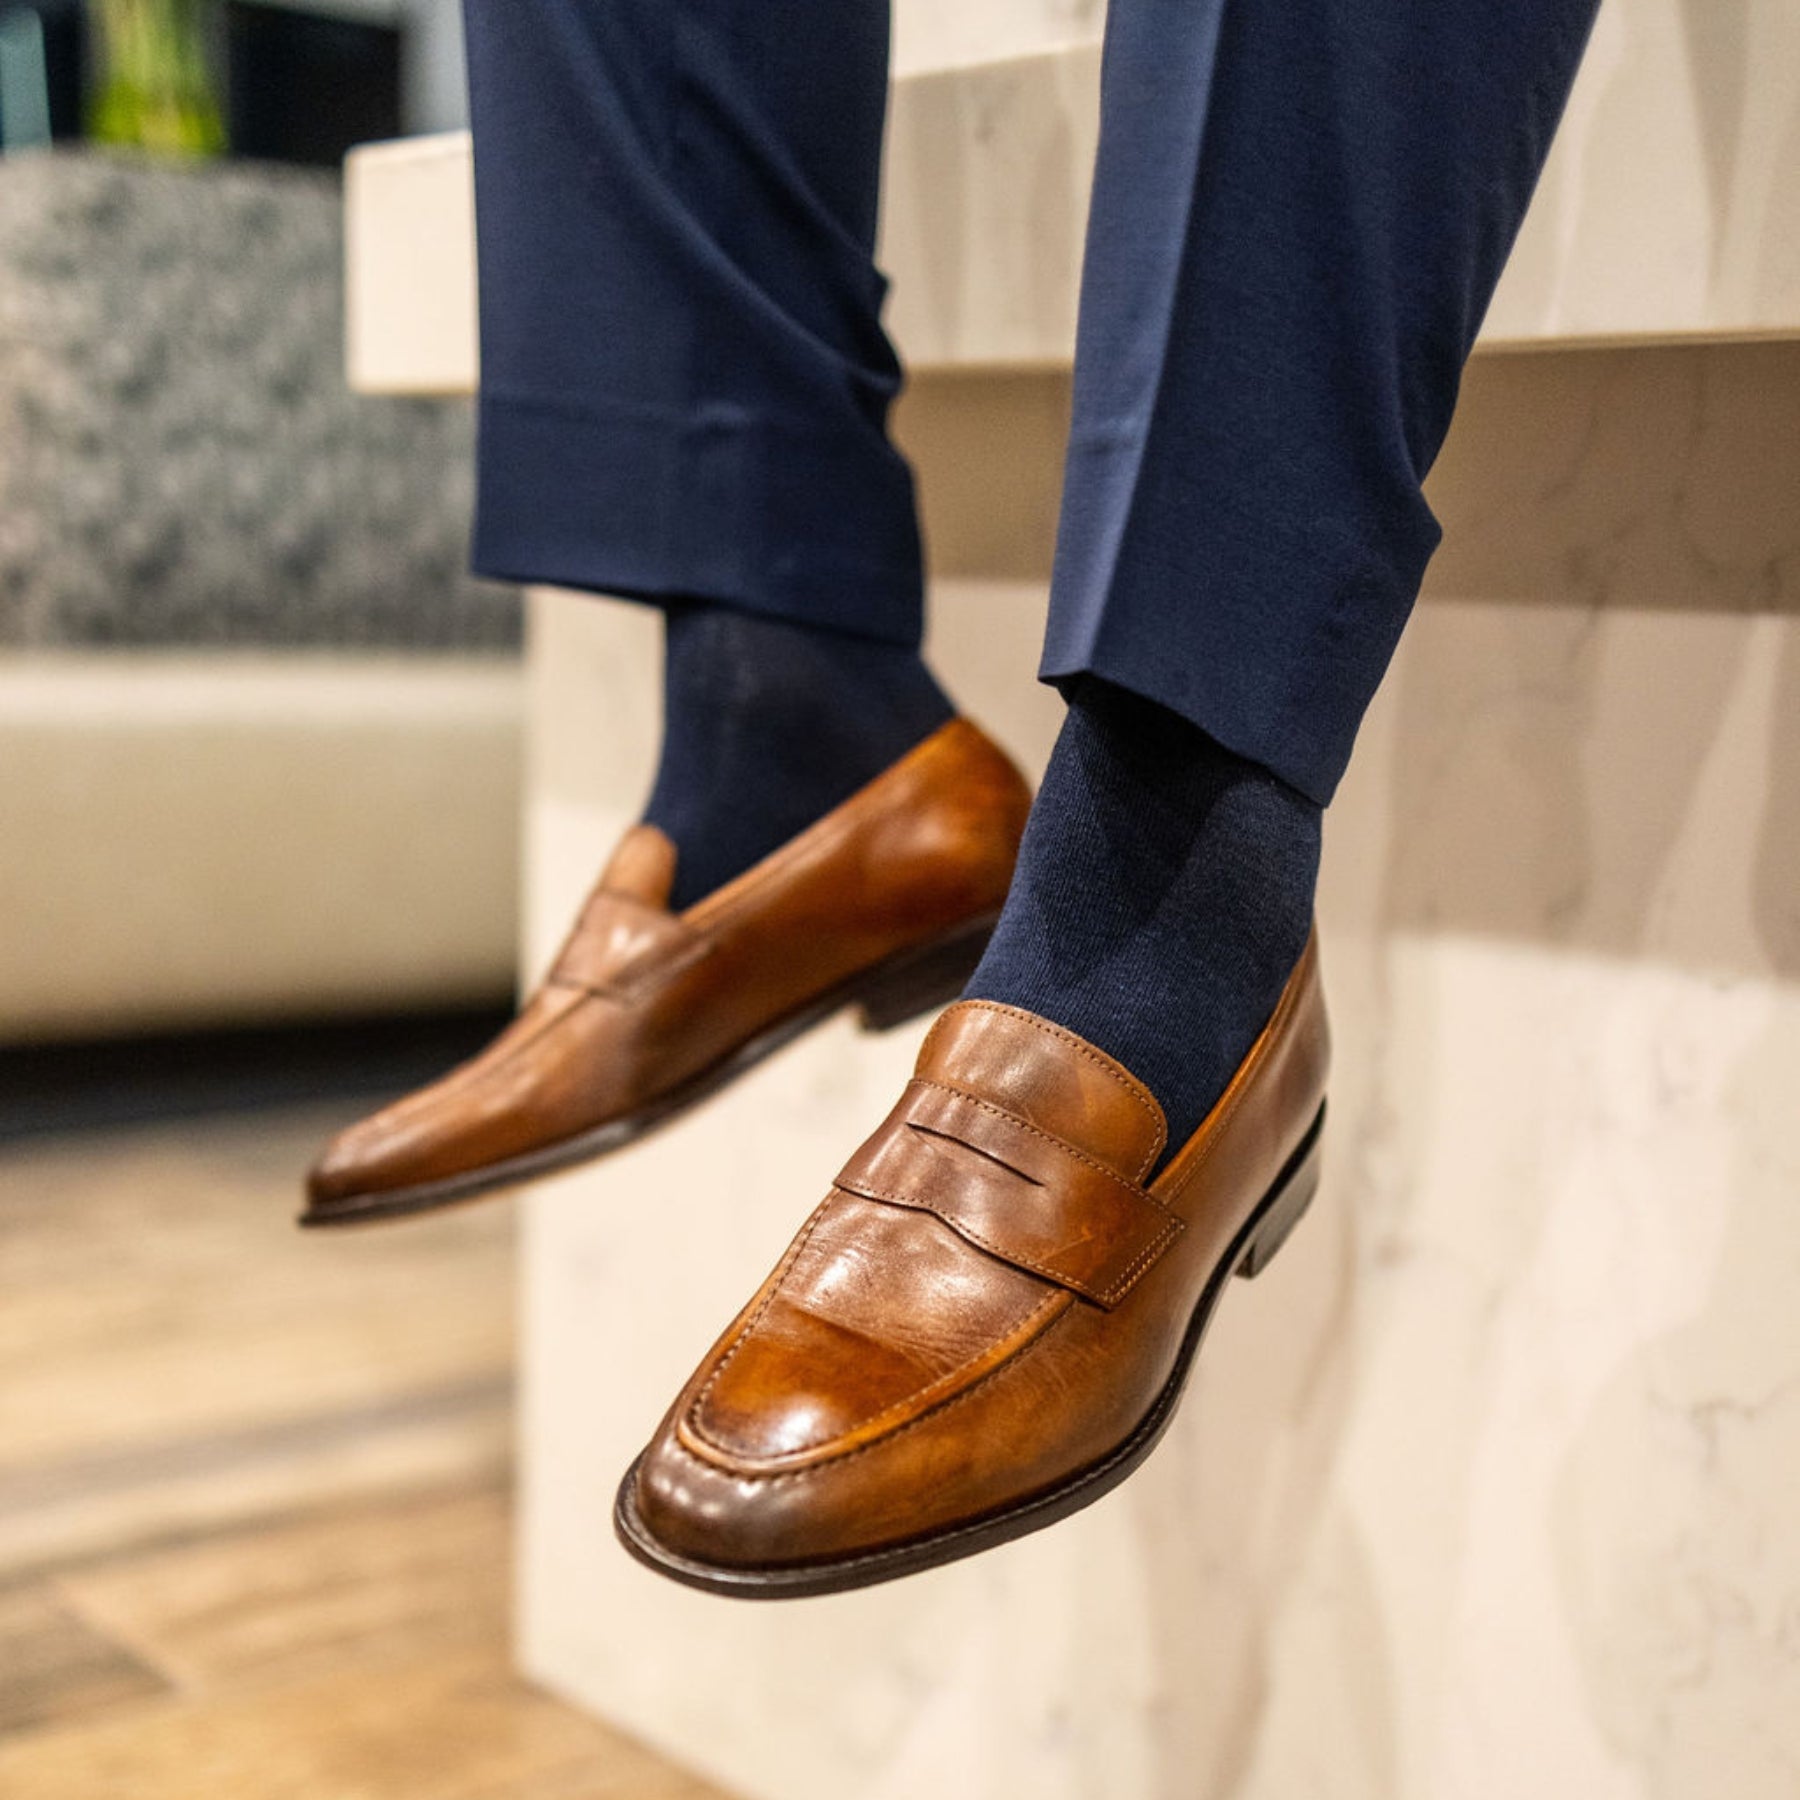 Men's Brown Dress Shoes: The Ultimate Guide